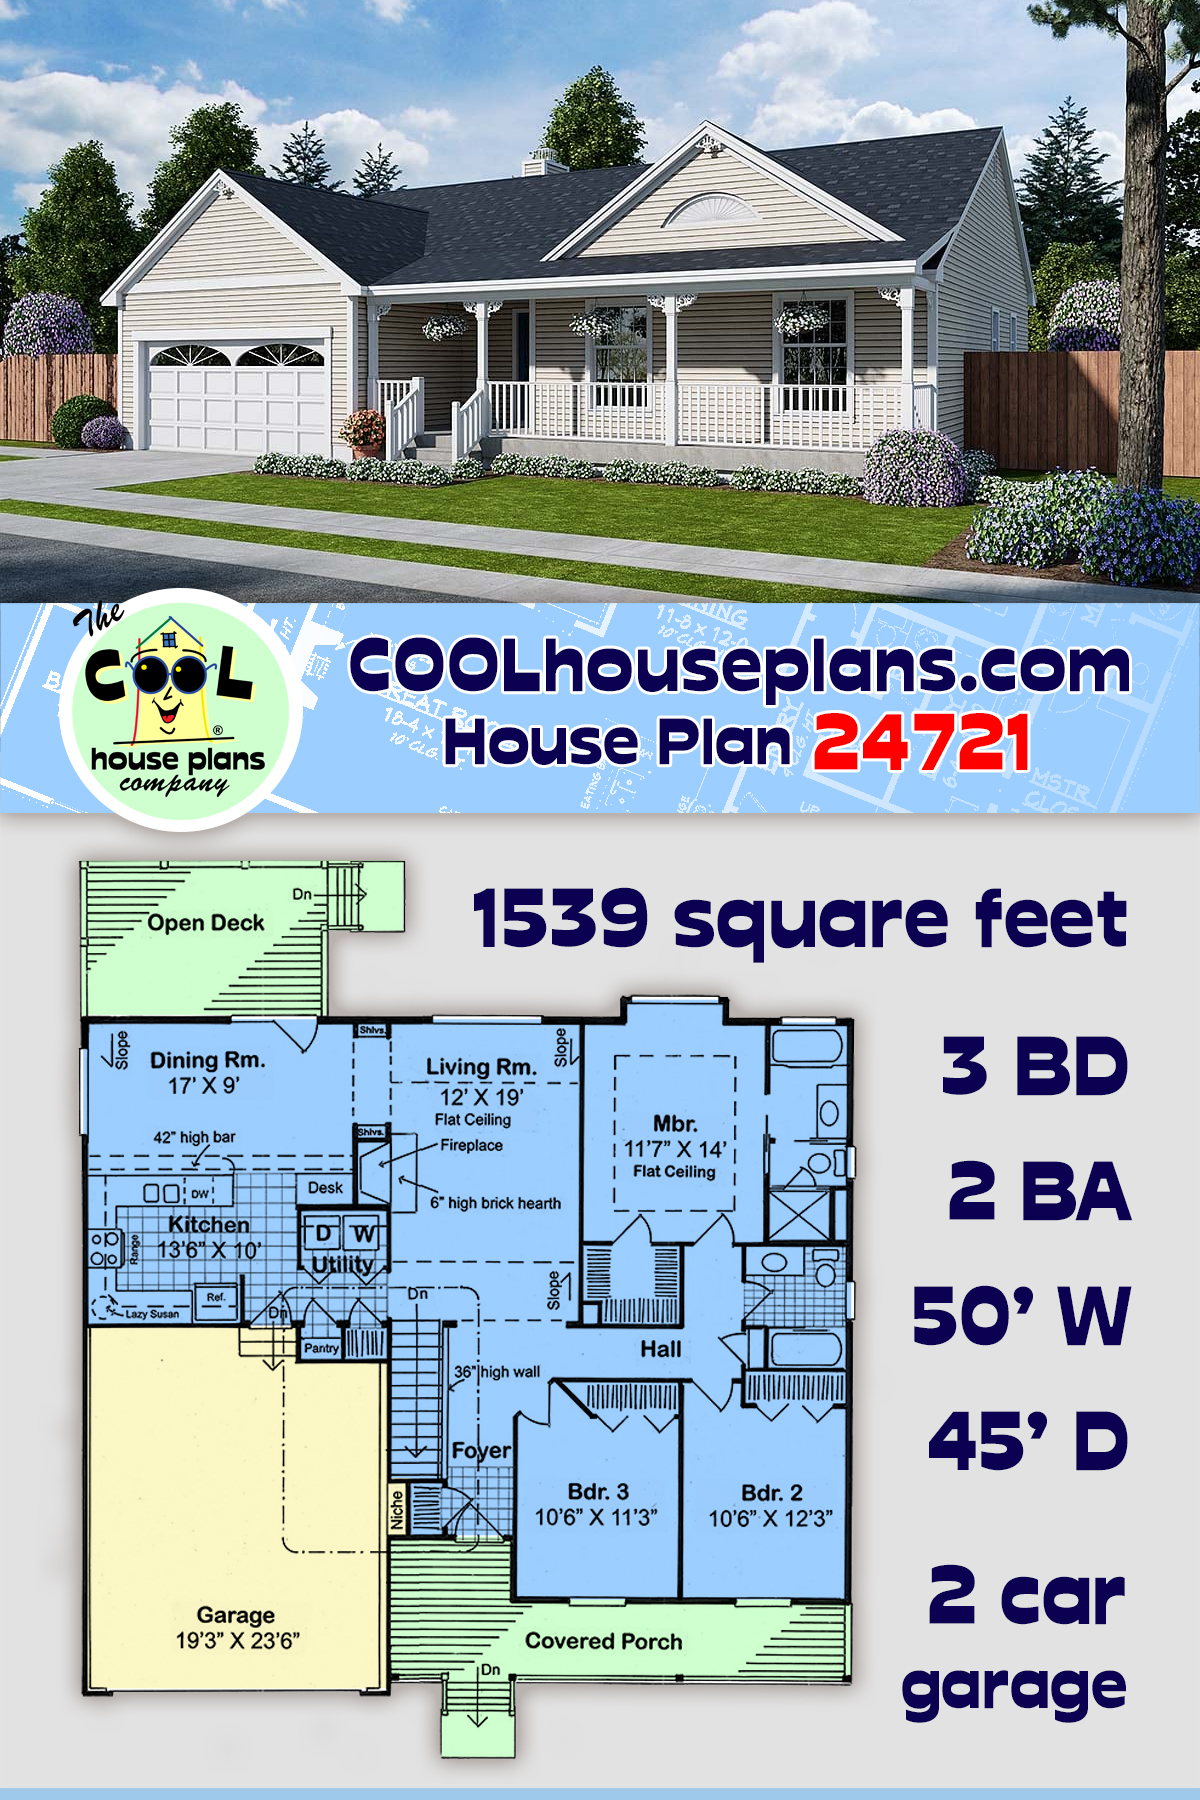 Bungalow, Country, Southern, Traditional House Plan 24721 with 3 Beds, 2 Baths, 2 Car Garage